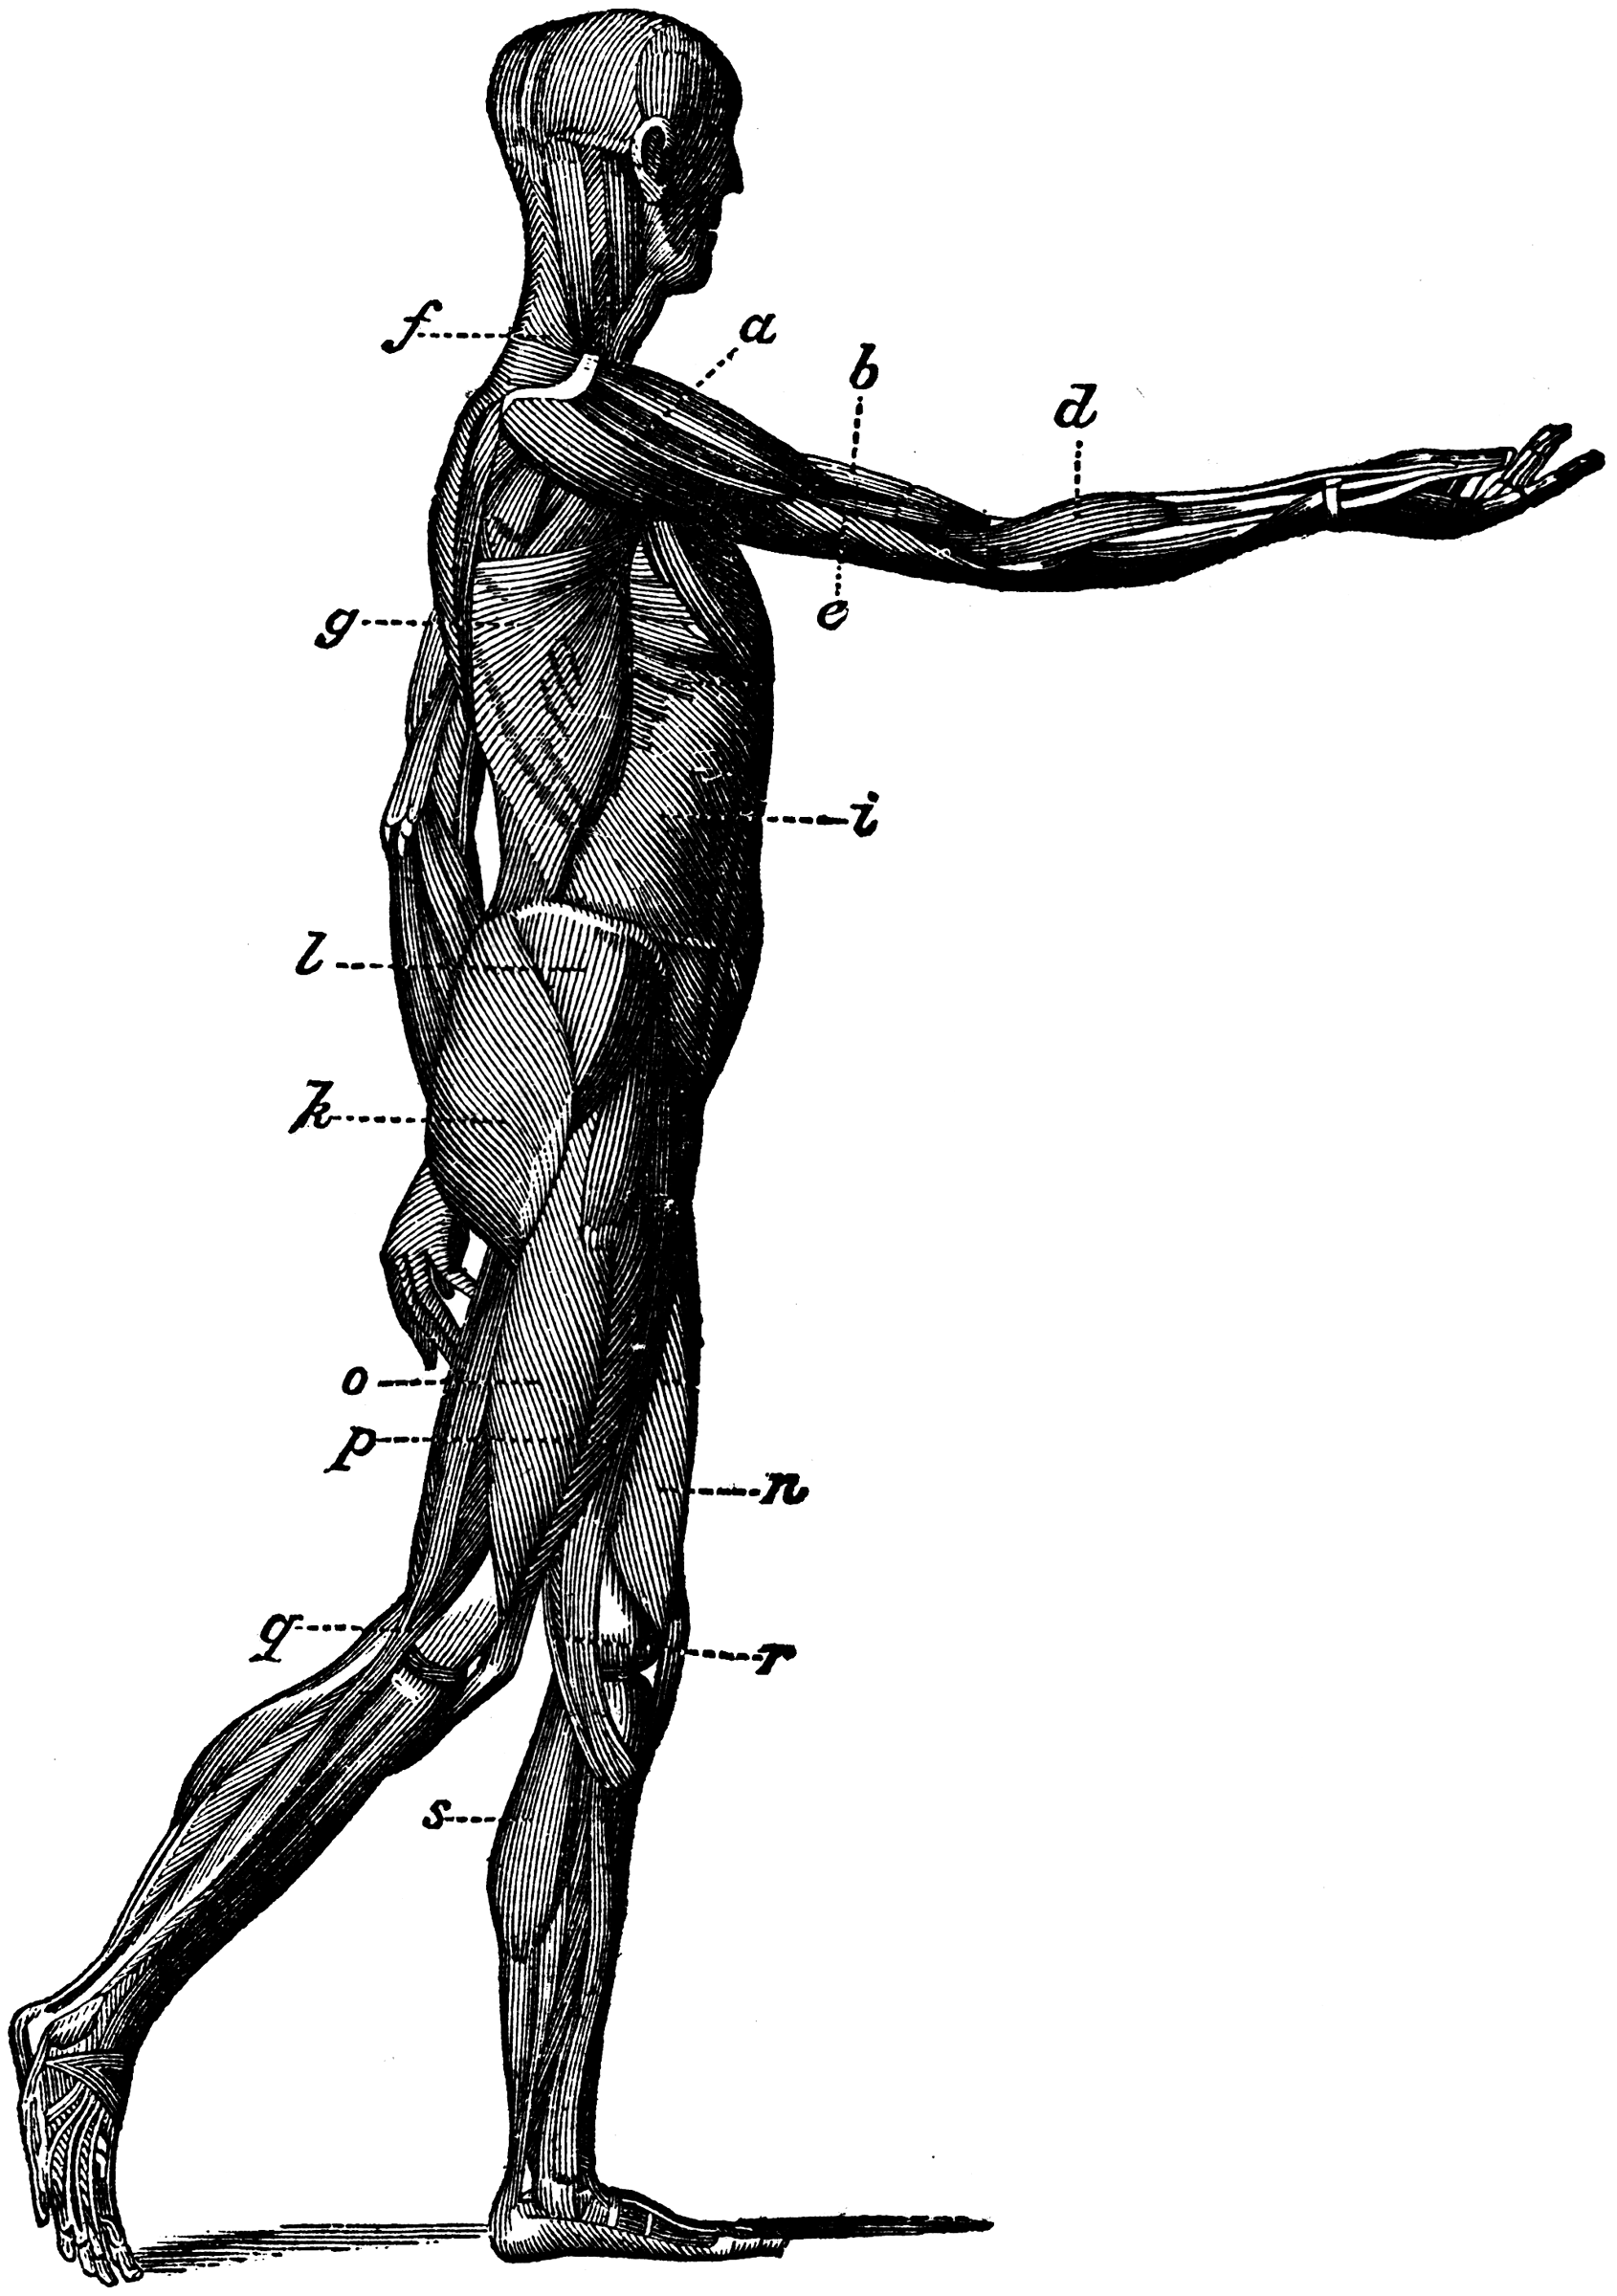 Side View of the Muscles of the Body | ClipArt ETC